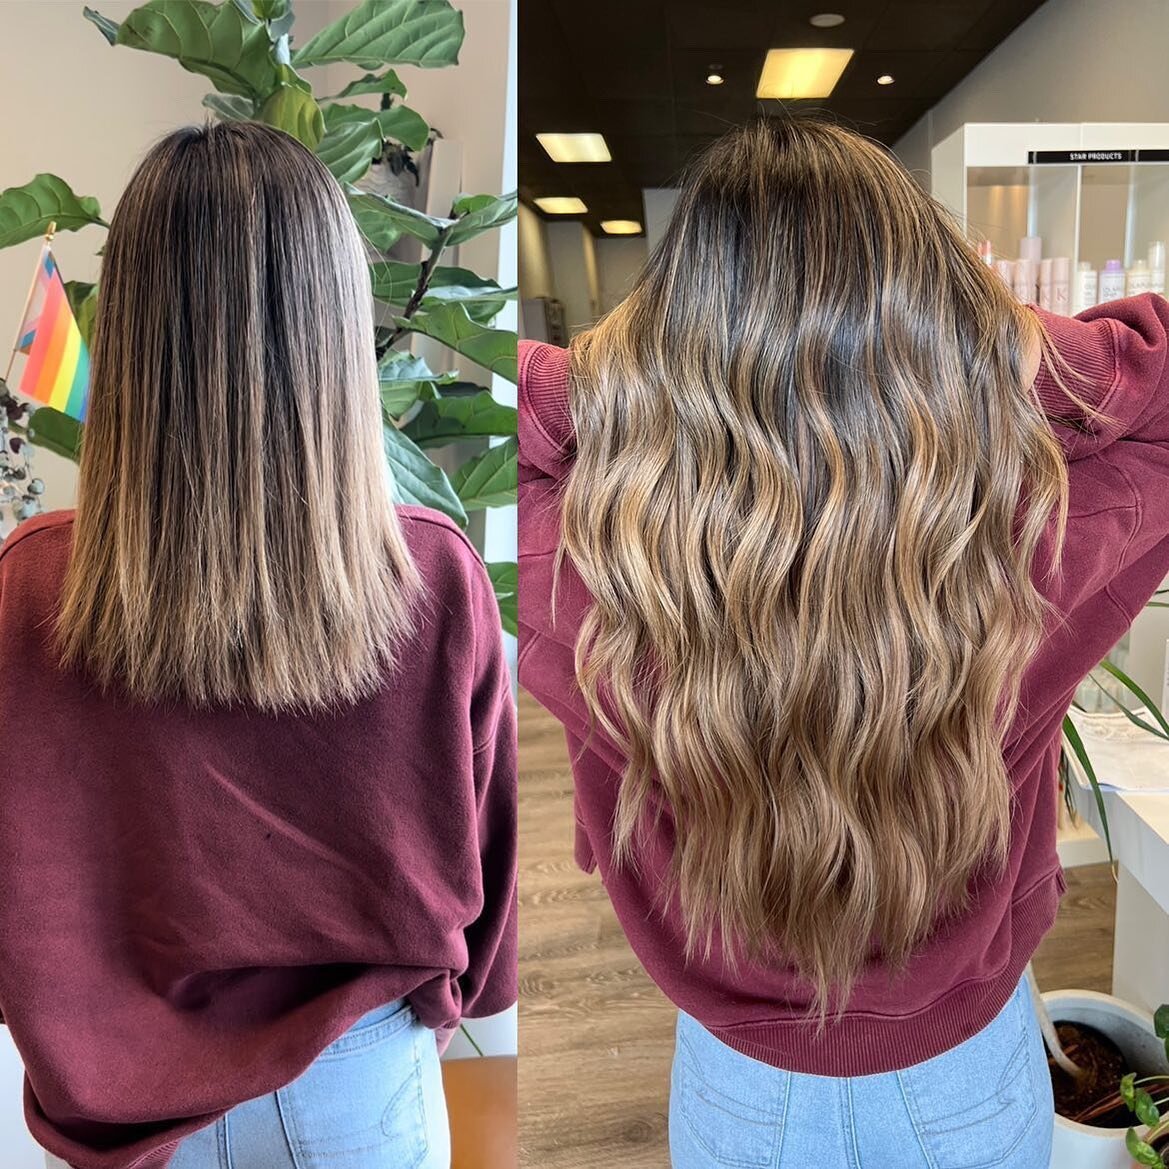 Extensions by @hairby_chaipenn 2 rows of 22inches, and toned for perfect color blend! 
.
.
.
#Seattleextensions #seattlehair #seattlesalon #bellevuehair #bellevuehairextensions #bellevueextensions #bellevuehairstylist #sesttlehairstylist #rentonhaire